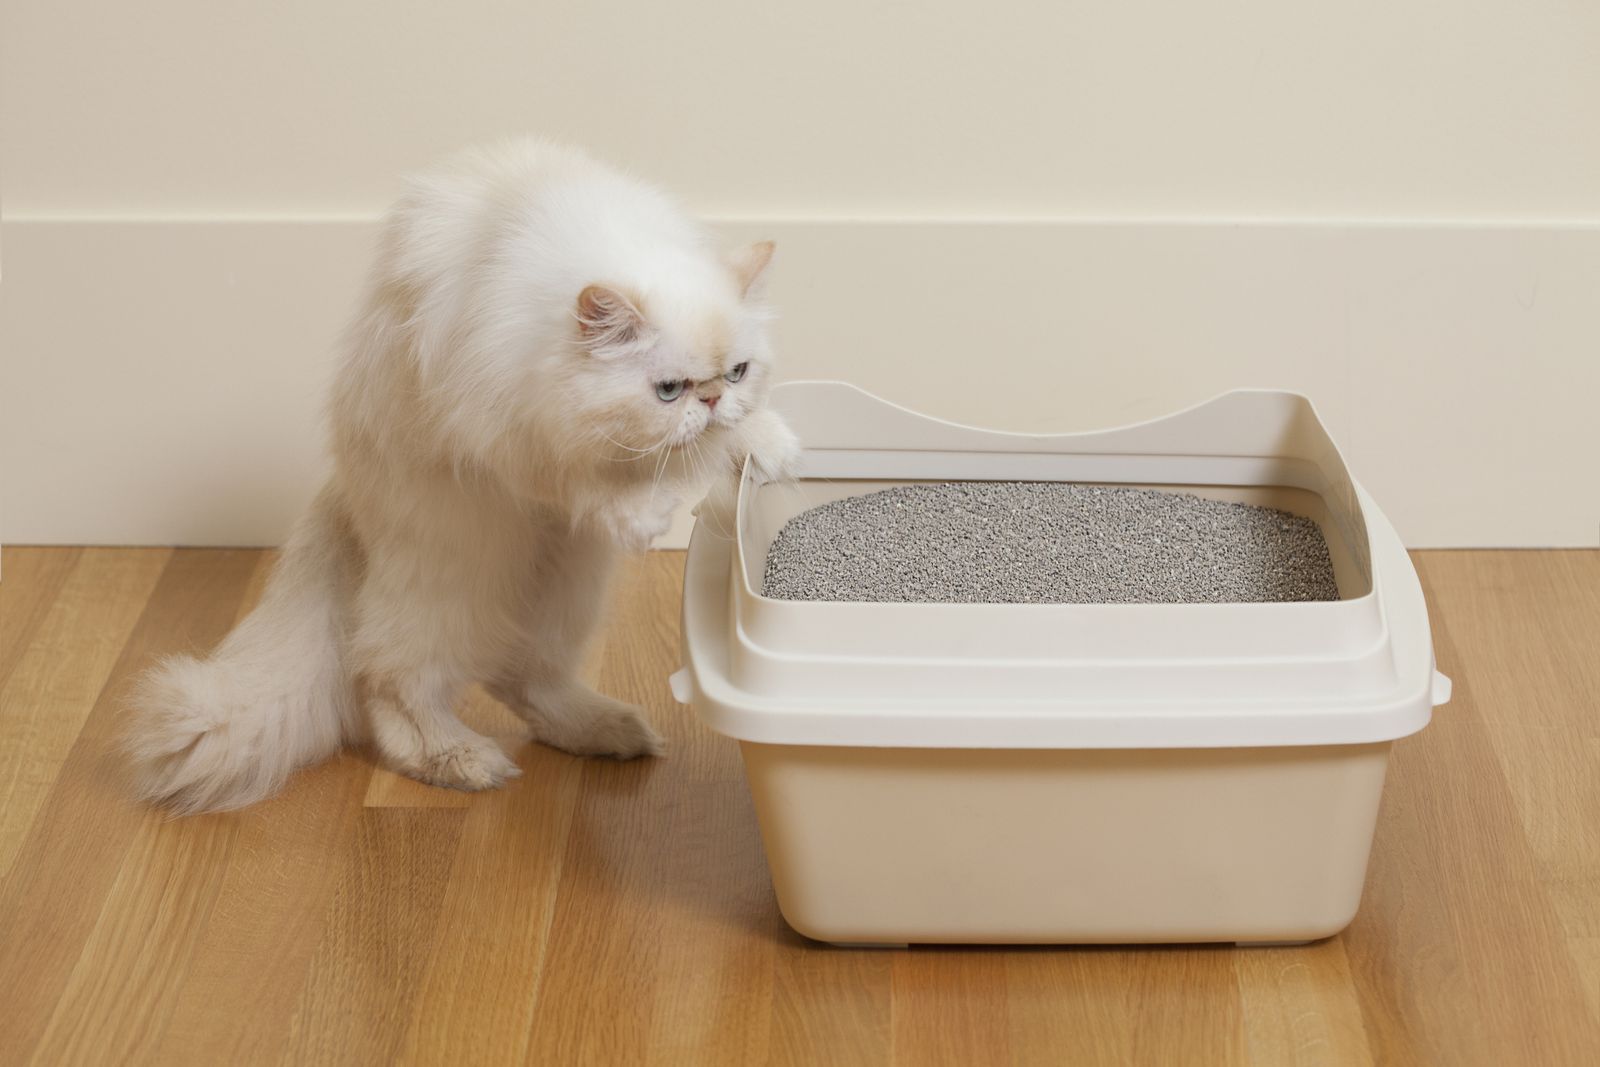 Minerals Used in Kitty Litter Could Help Fight Climate Change